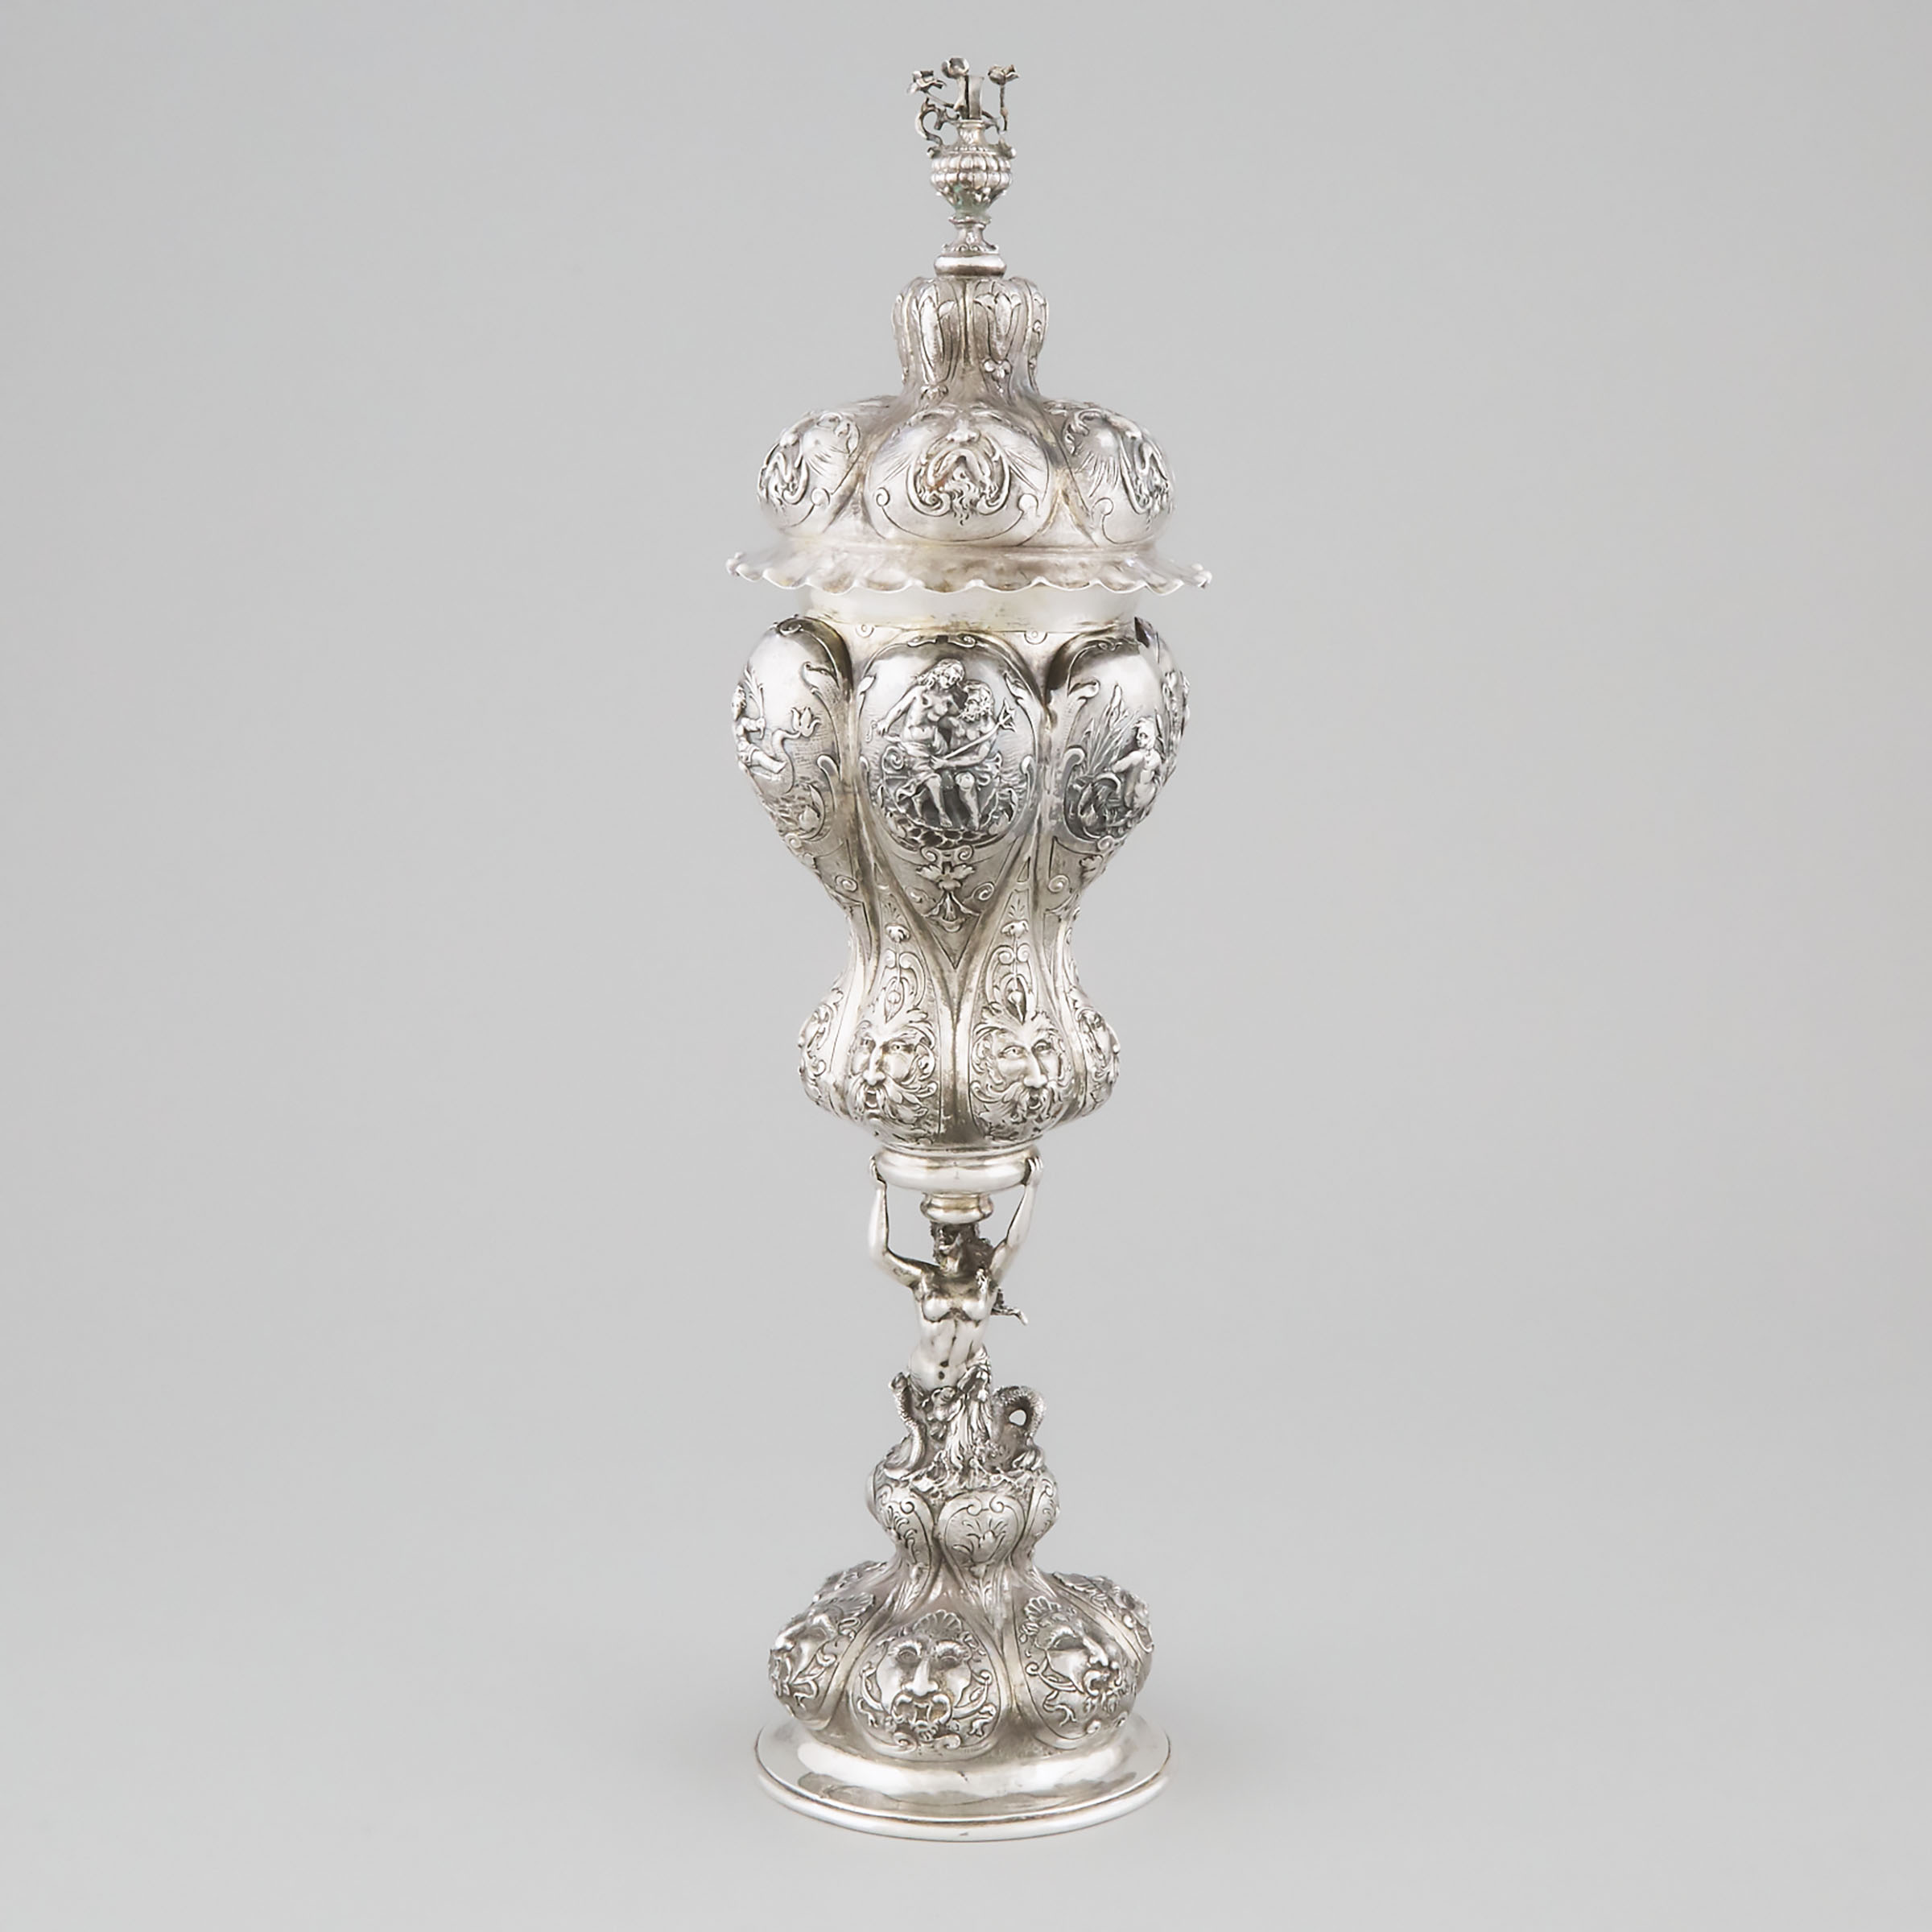 German Silver Large Standing Cup and Cover, probably Hanau, late 19th century